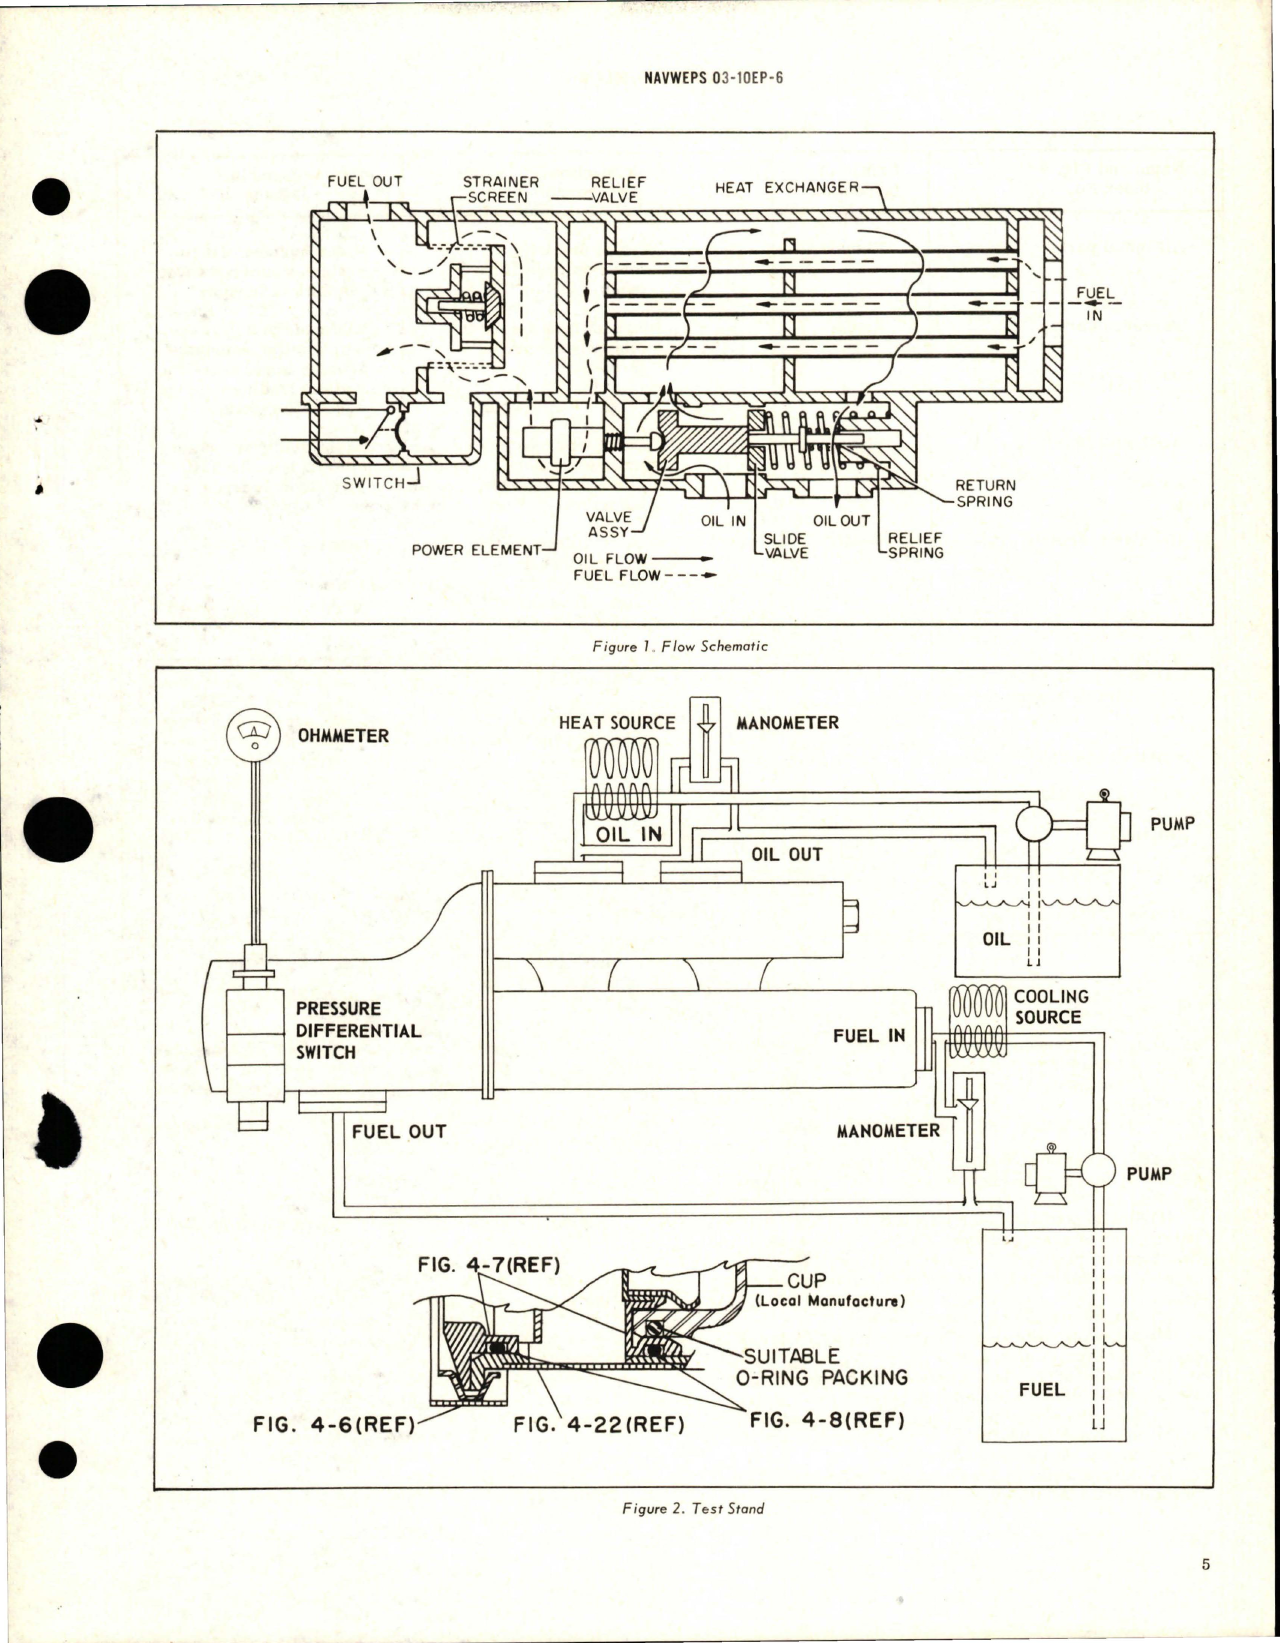 Sample page 5 from AirCorps Library document: Overhaul Instructions with Parts for Fuel Heater and Strainer w By-pass Indication - Parts UA524240-2, UA524240-3, and UA524240-4